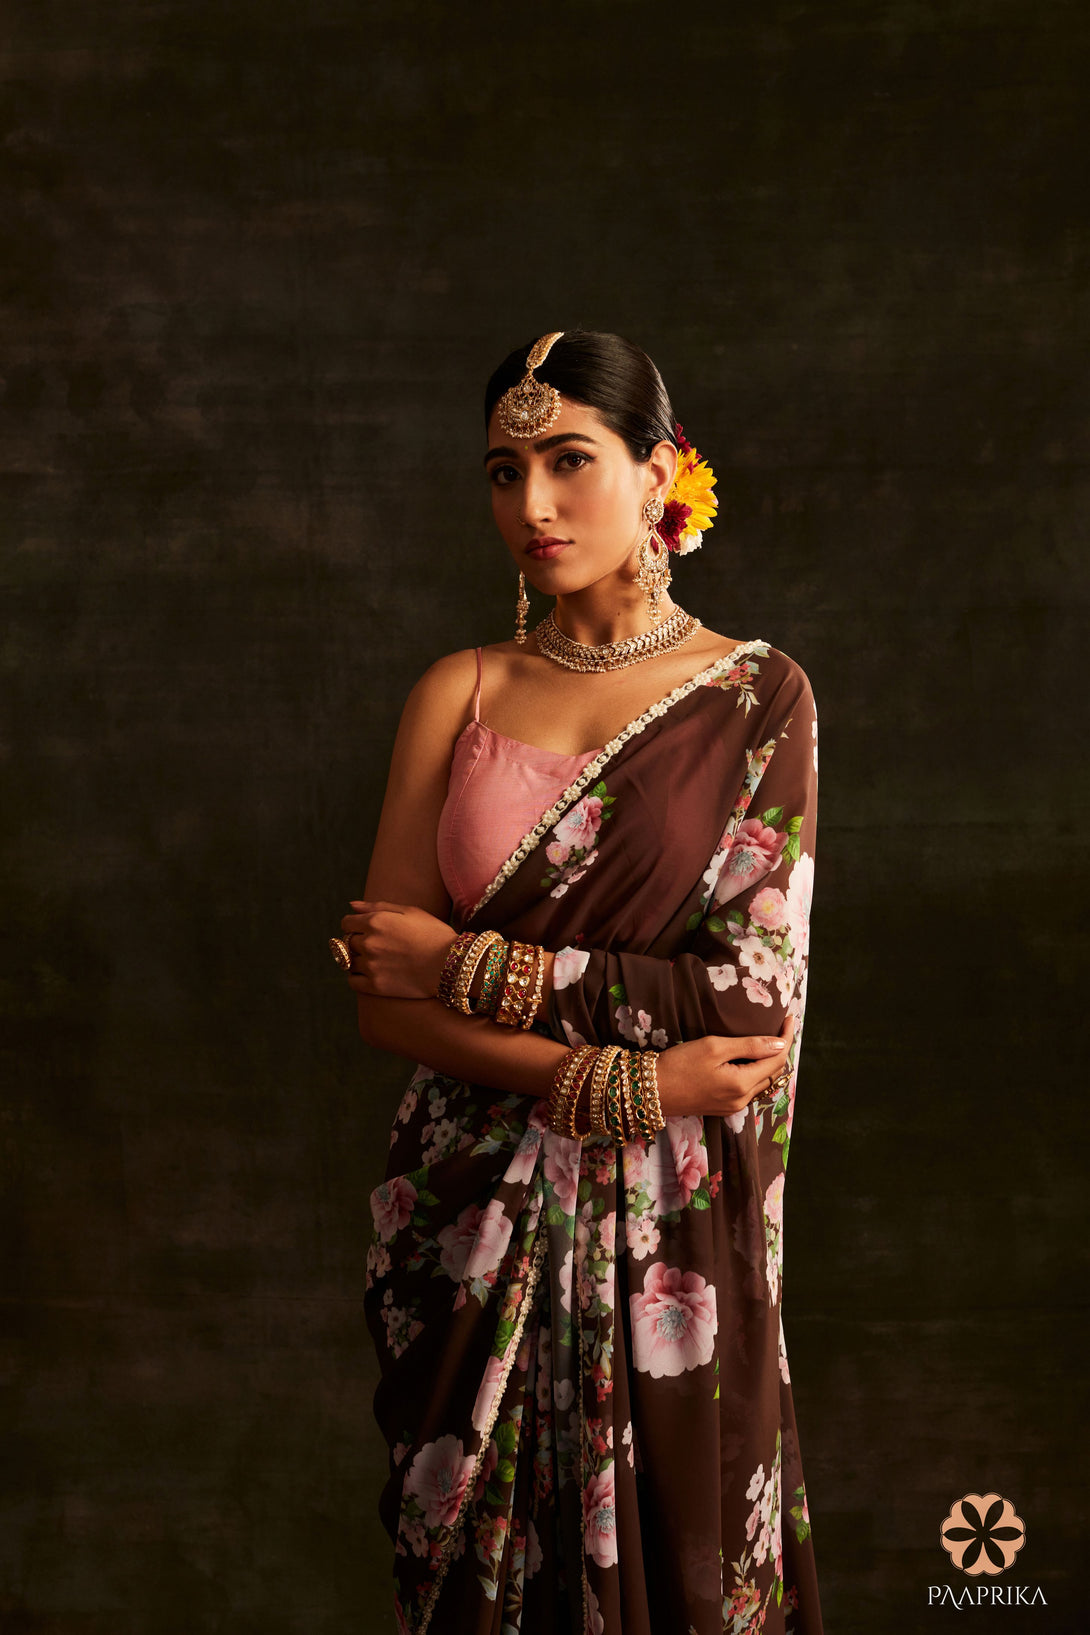  Beautiful drape of the Trendy Brown Floral Printed Georgette Saree, exuding earthy elegance. The lightweight georgette fabric drapes gracefully, highlighting the captivating floral prints.